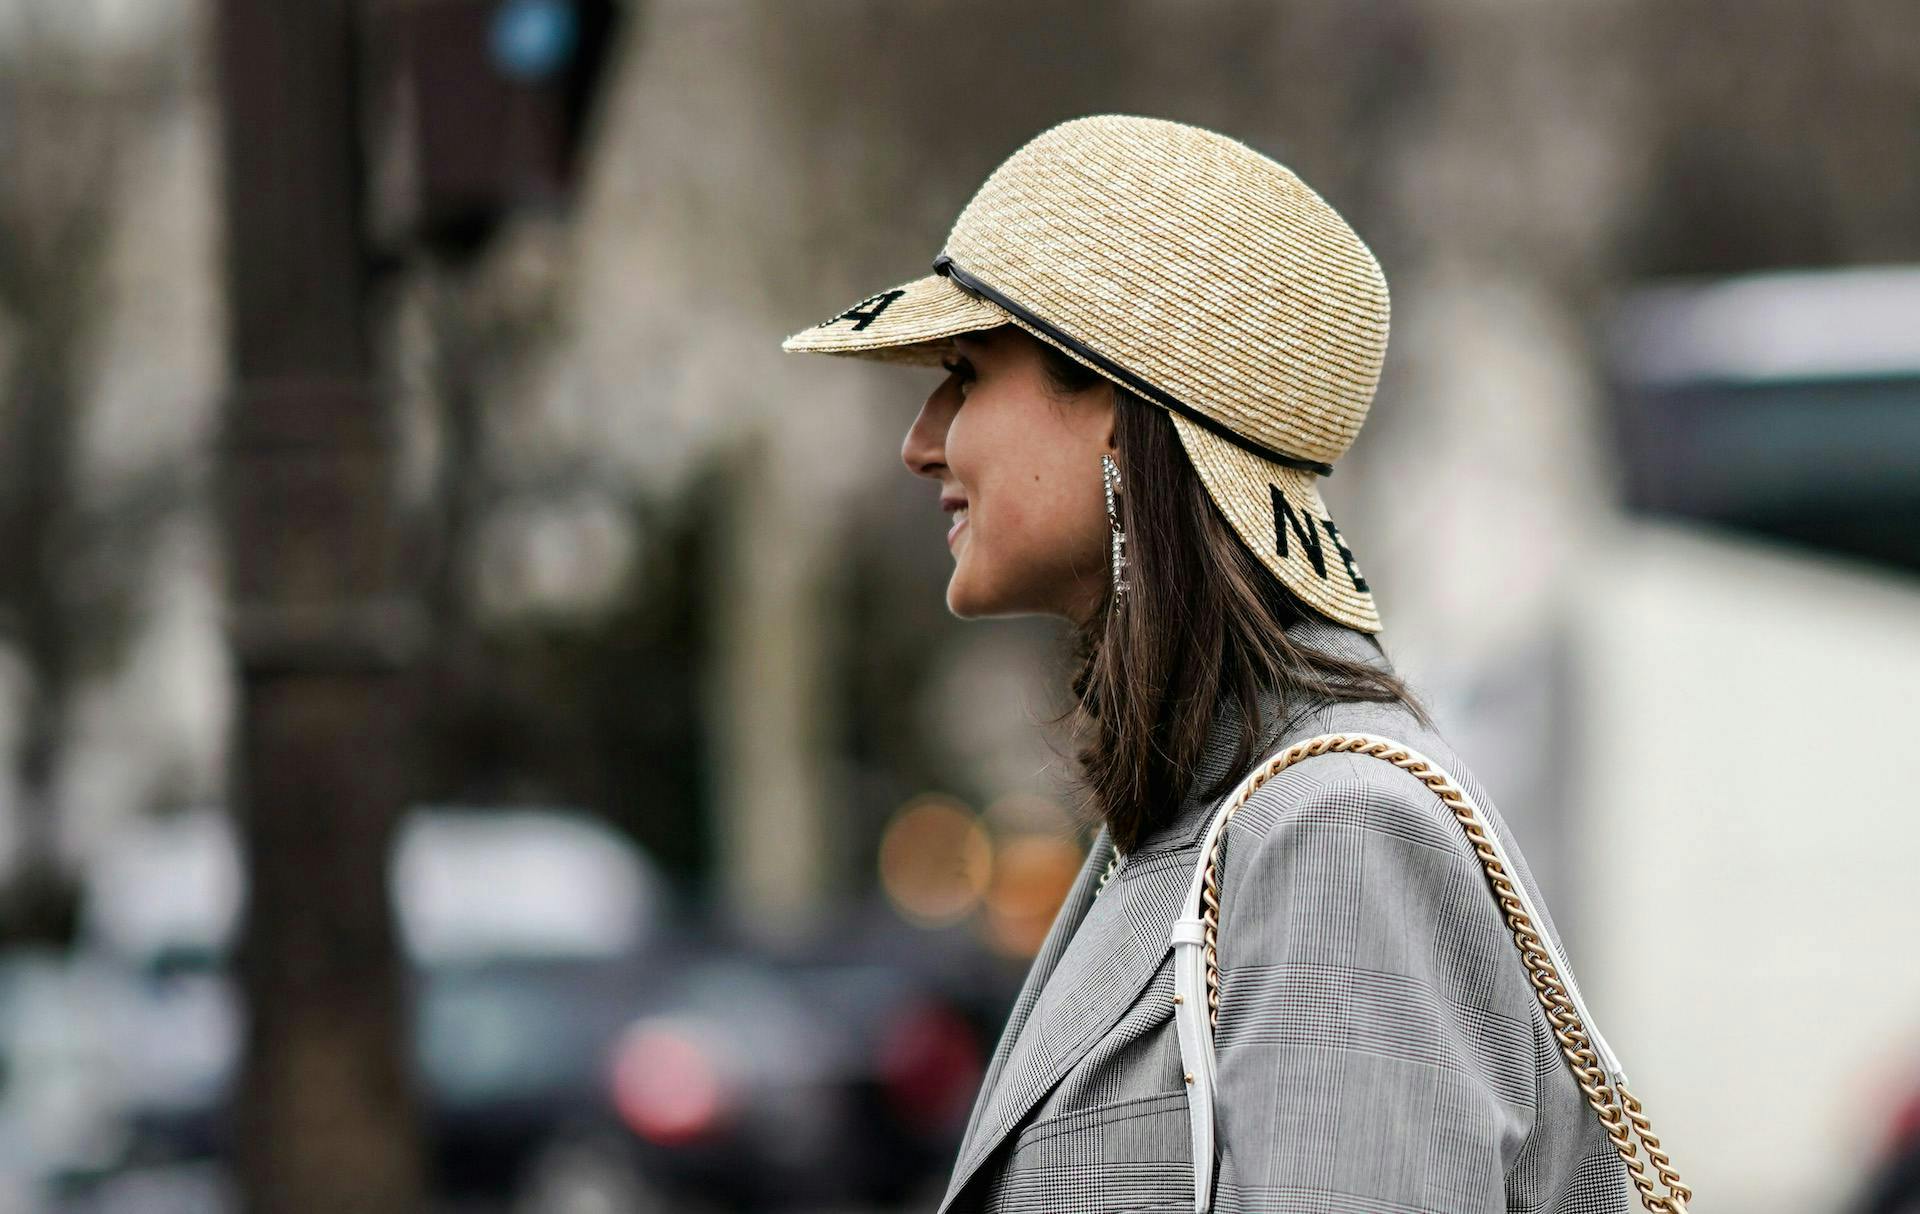 arts culture and entertainment,celebrities,fashion,street style paris clothing apparel person human hat sun hat